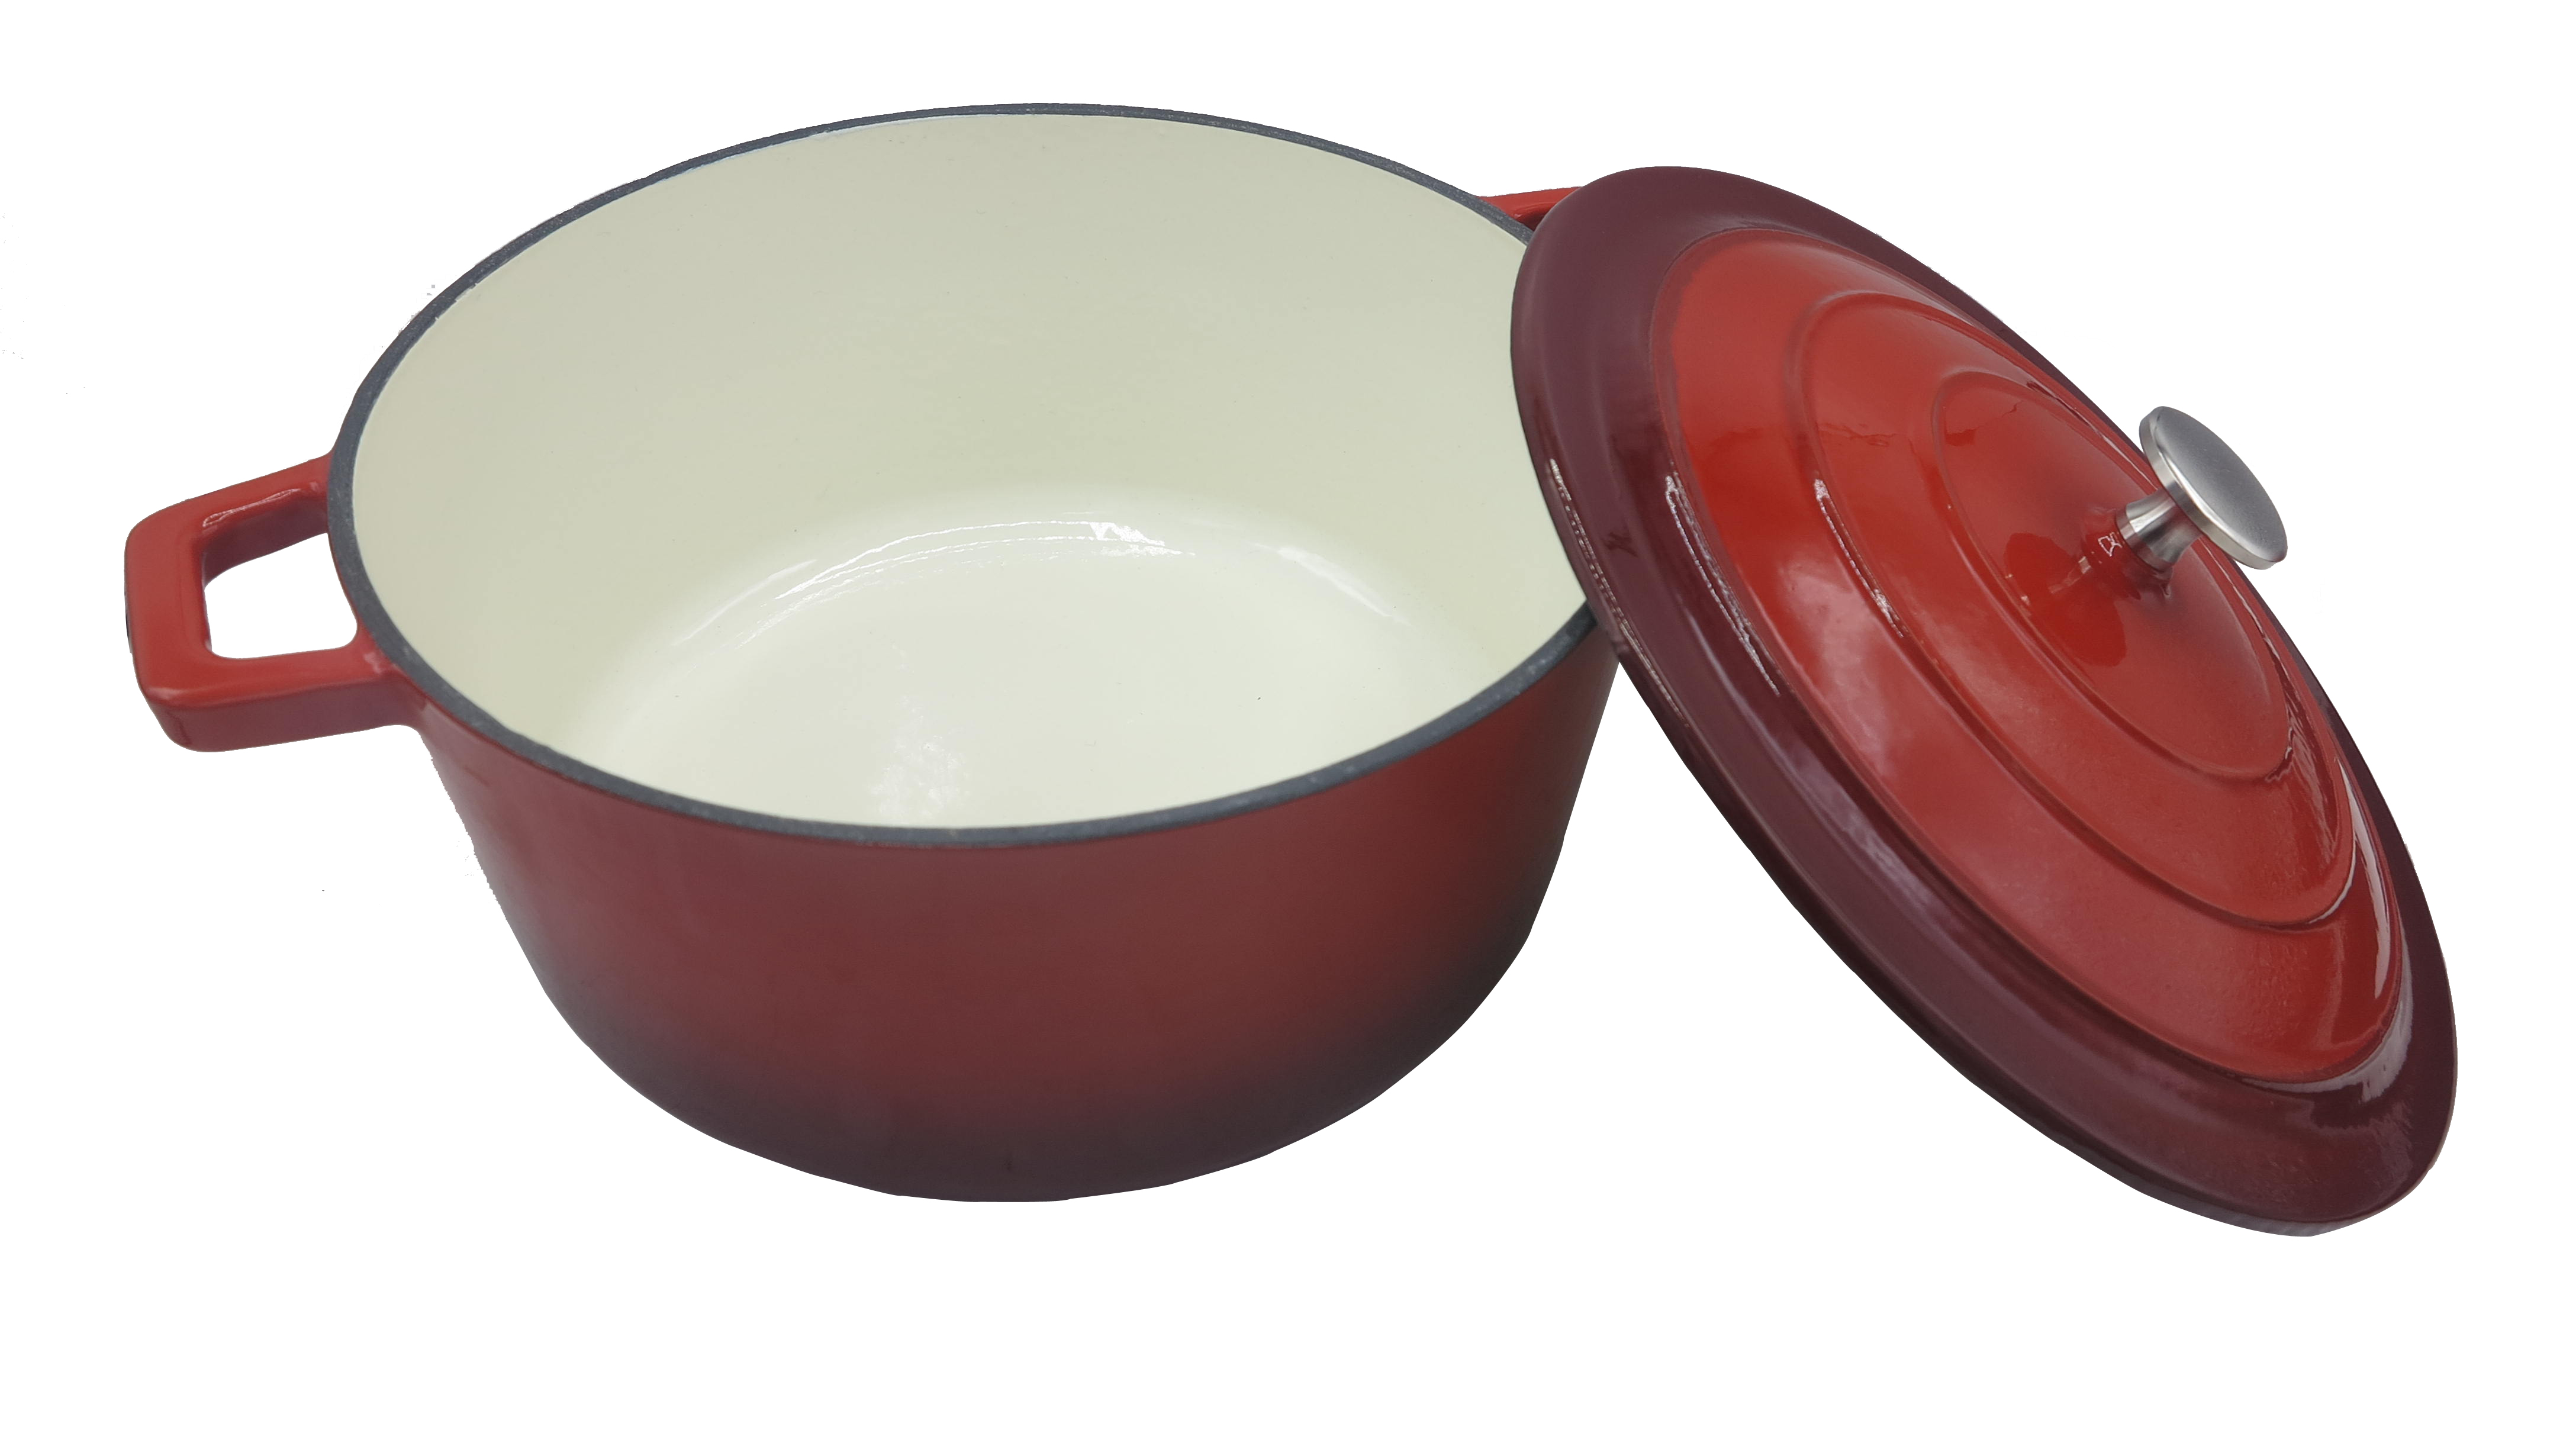 Cast Iron Casserole Pan Red Enamel Cast Iron Casserole Dish with Dual Handles and Lid